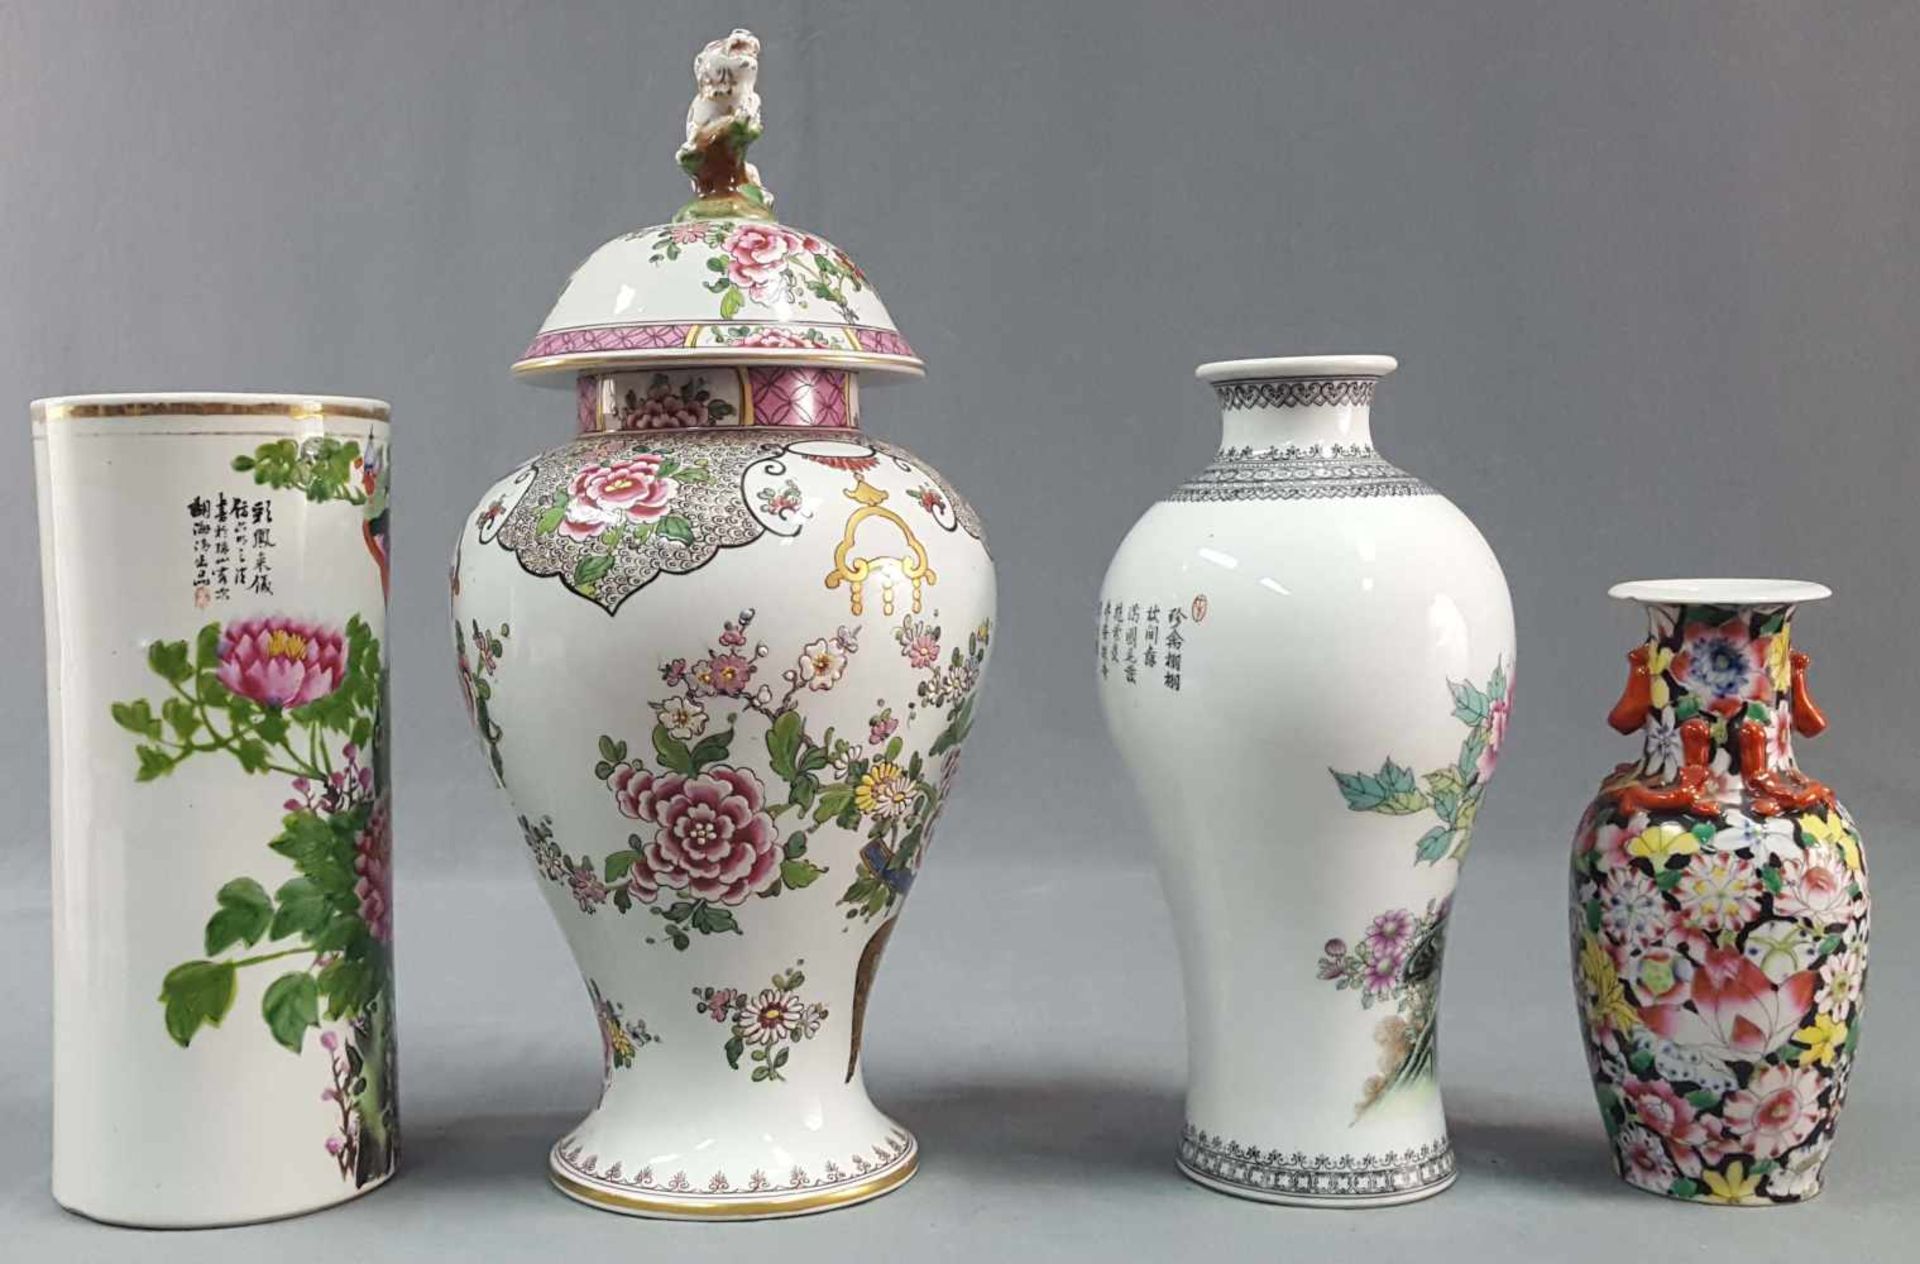 3 vases and 1 lid vase. Proably China. - Image 10 of 14